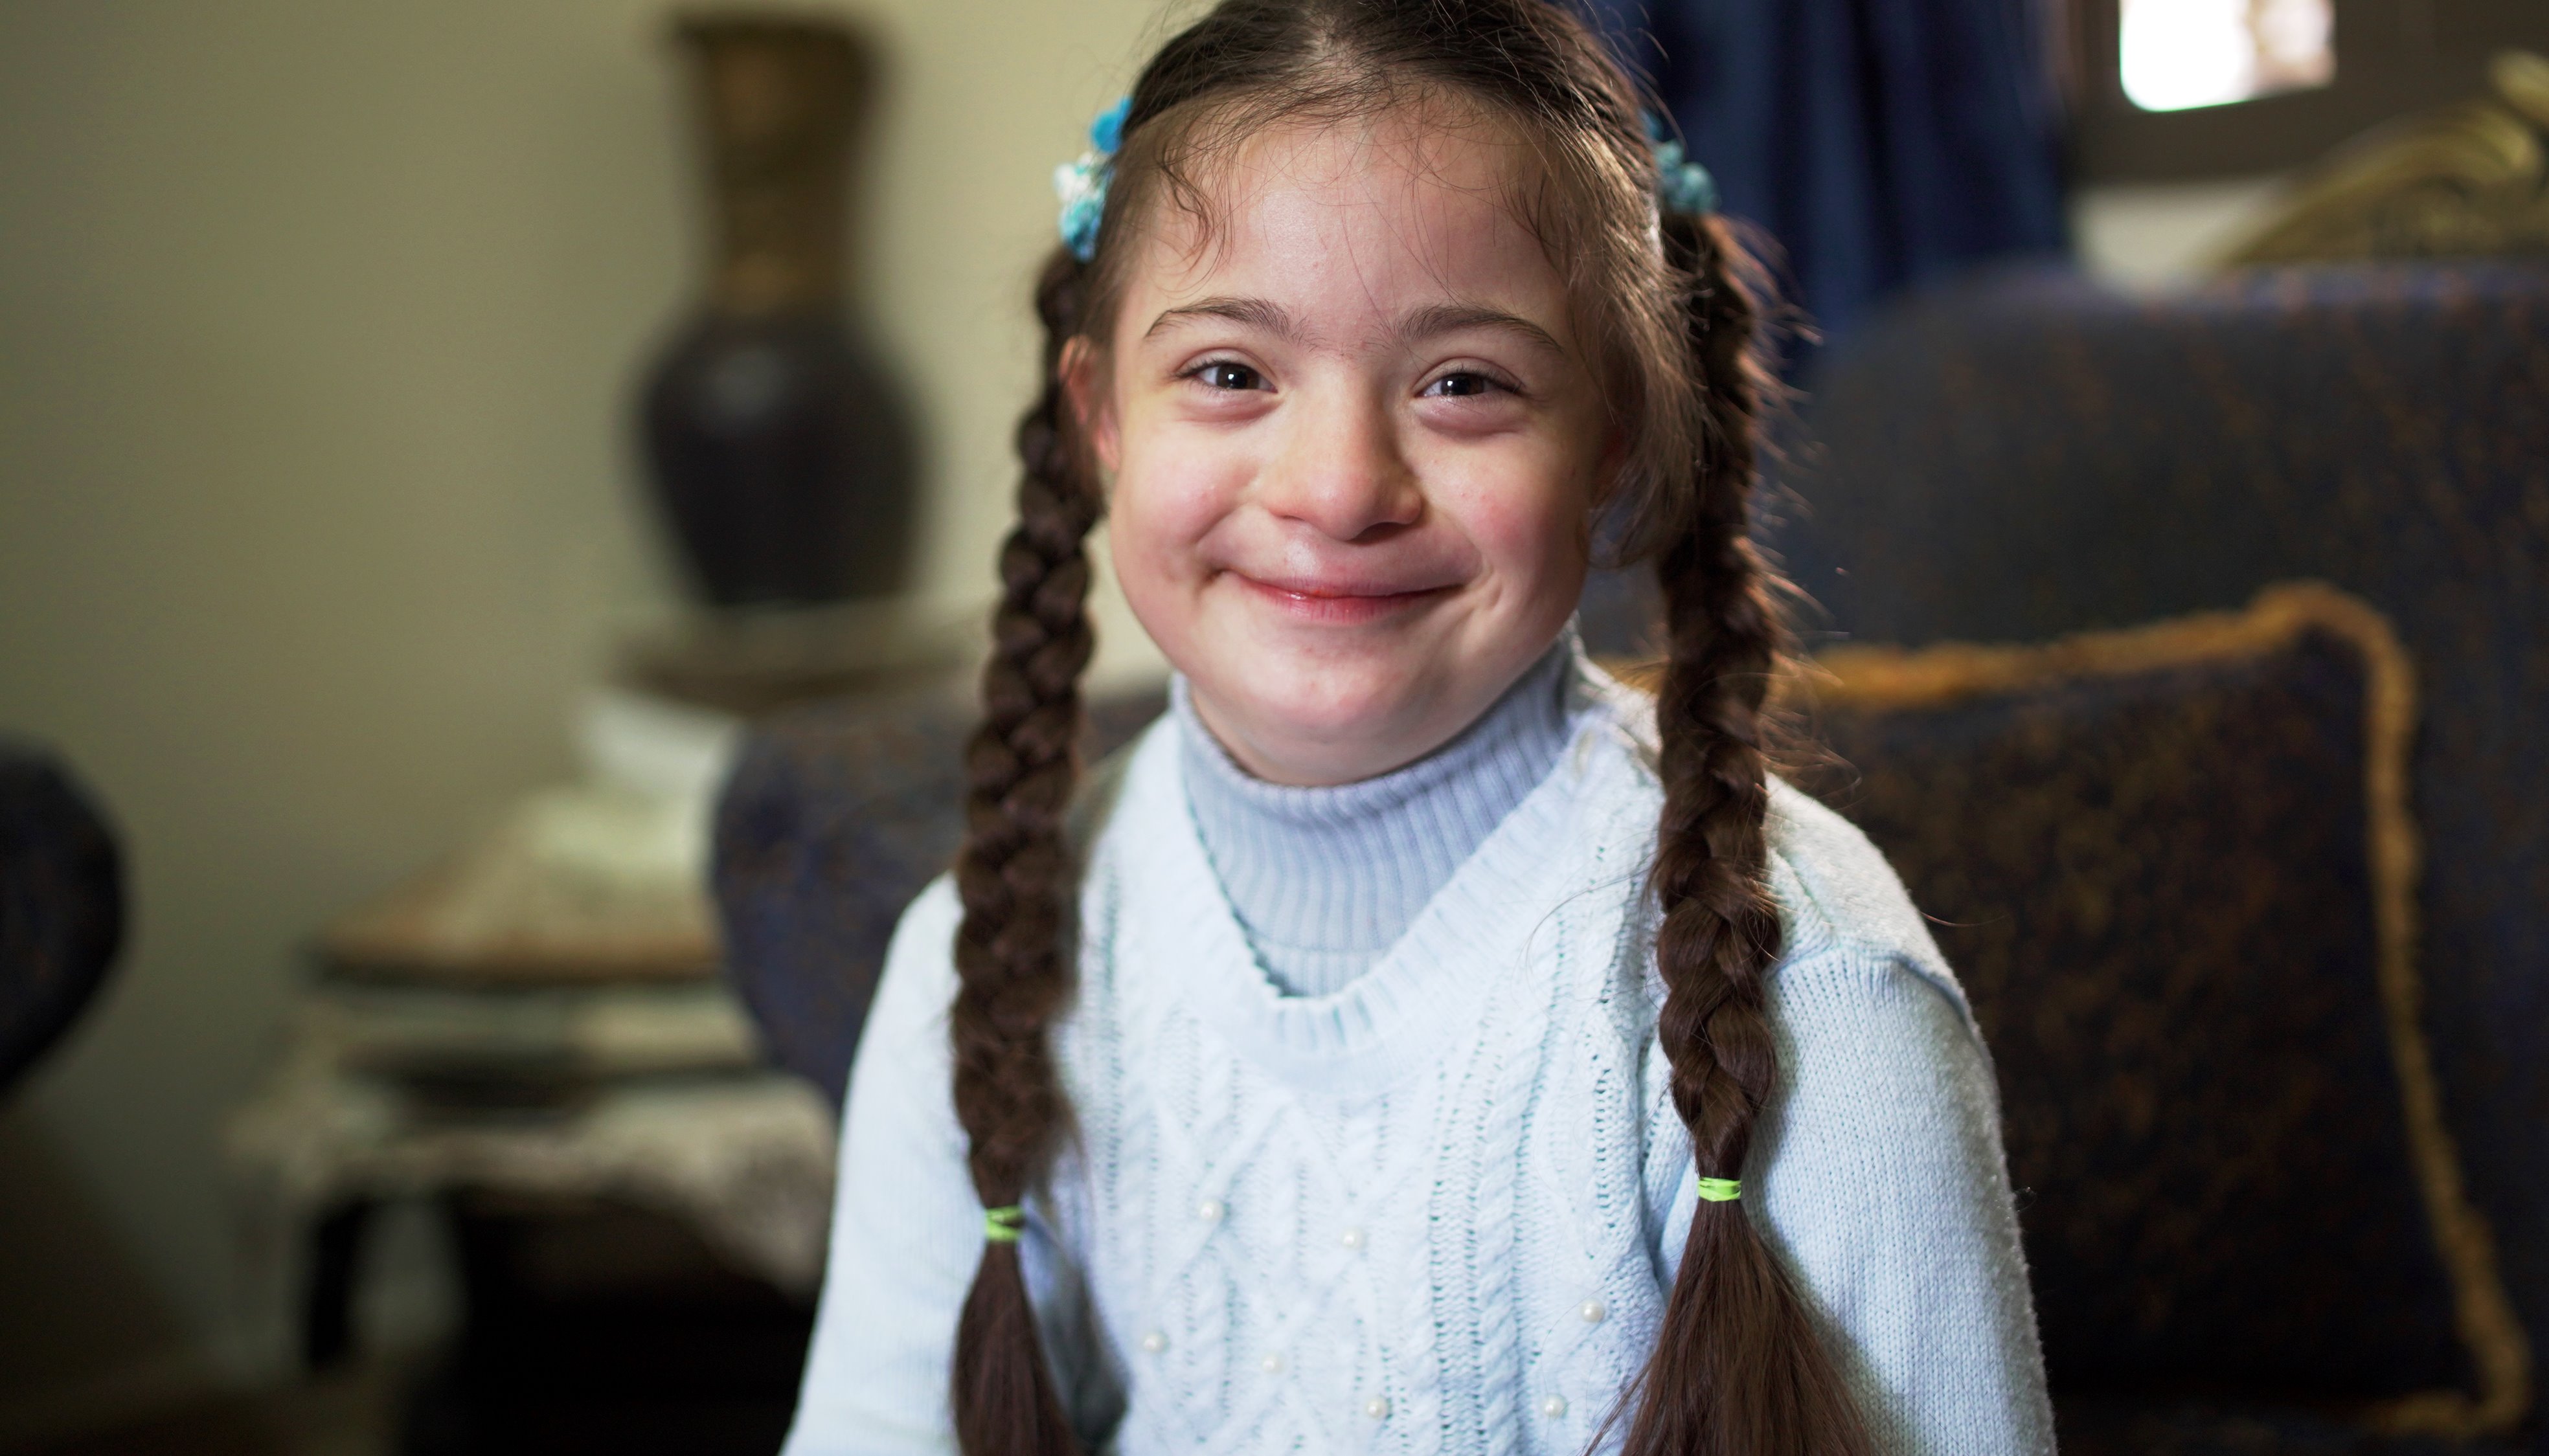 Read DANIA’S STORY - A FACE THAT LIGHTS UP LIVES by UNICEF Lebanon